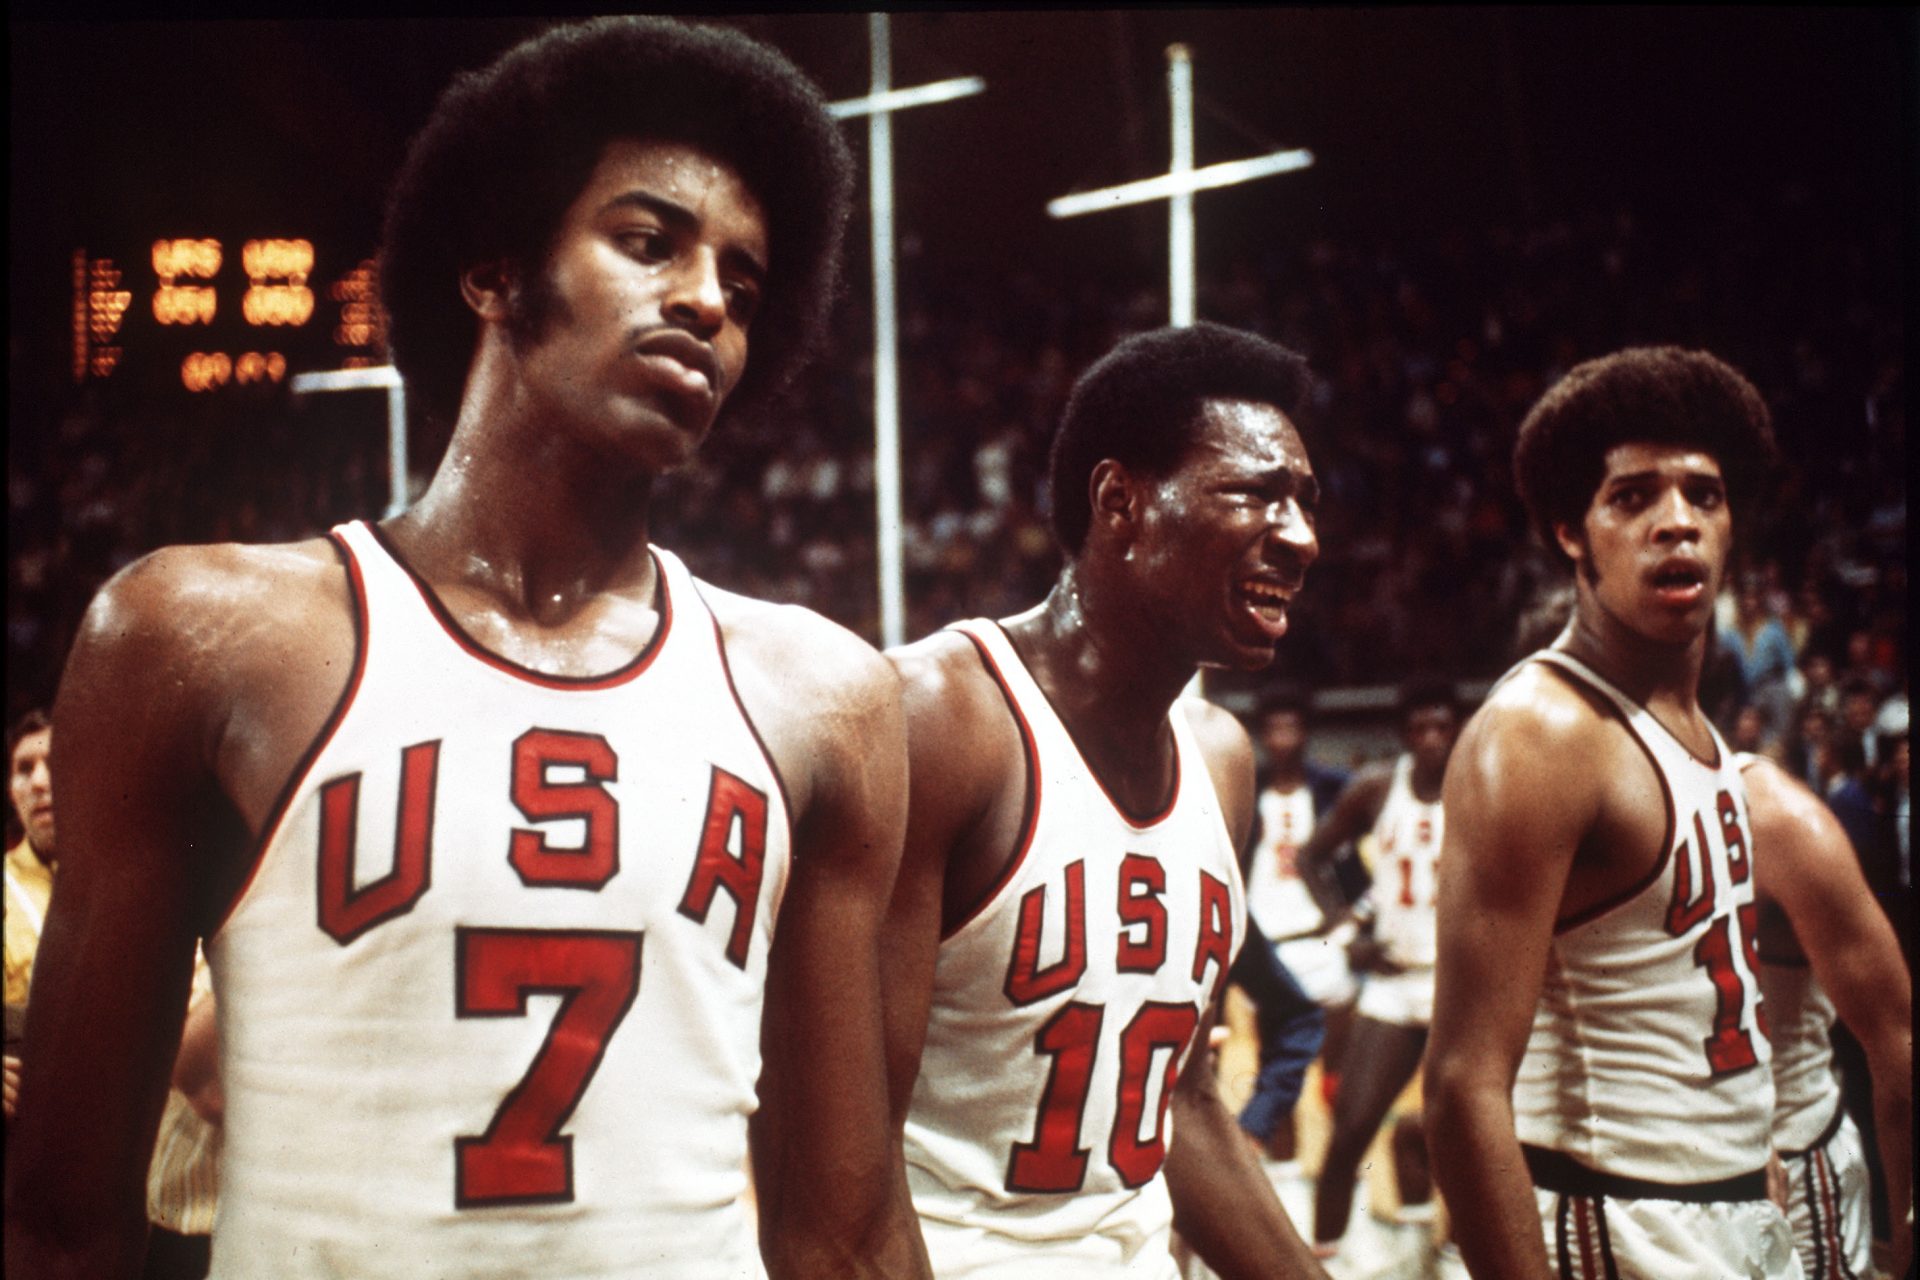 The day the Soviets beat the USA at basketball